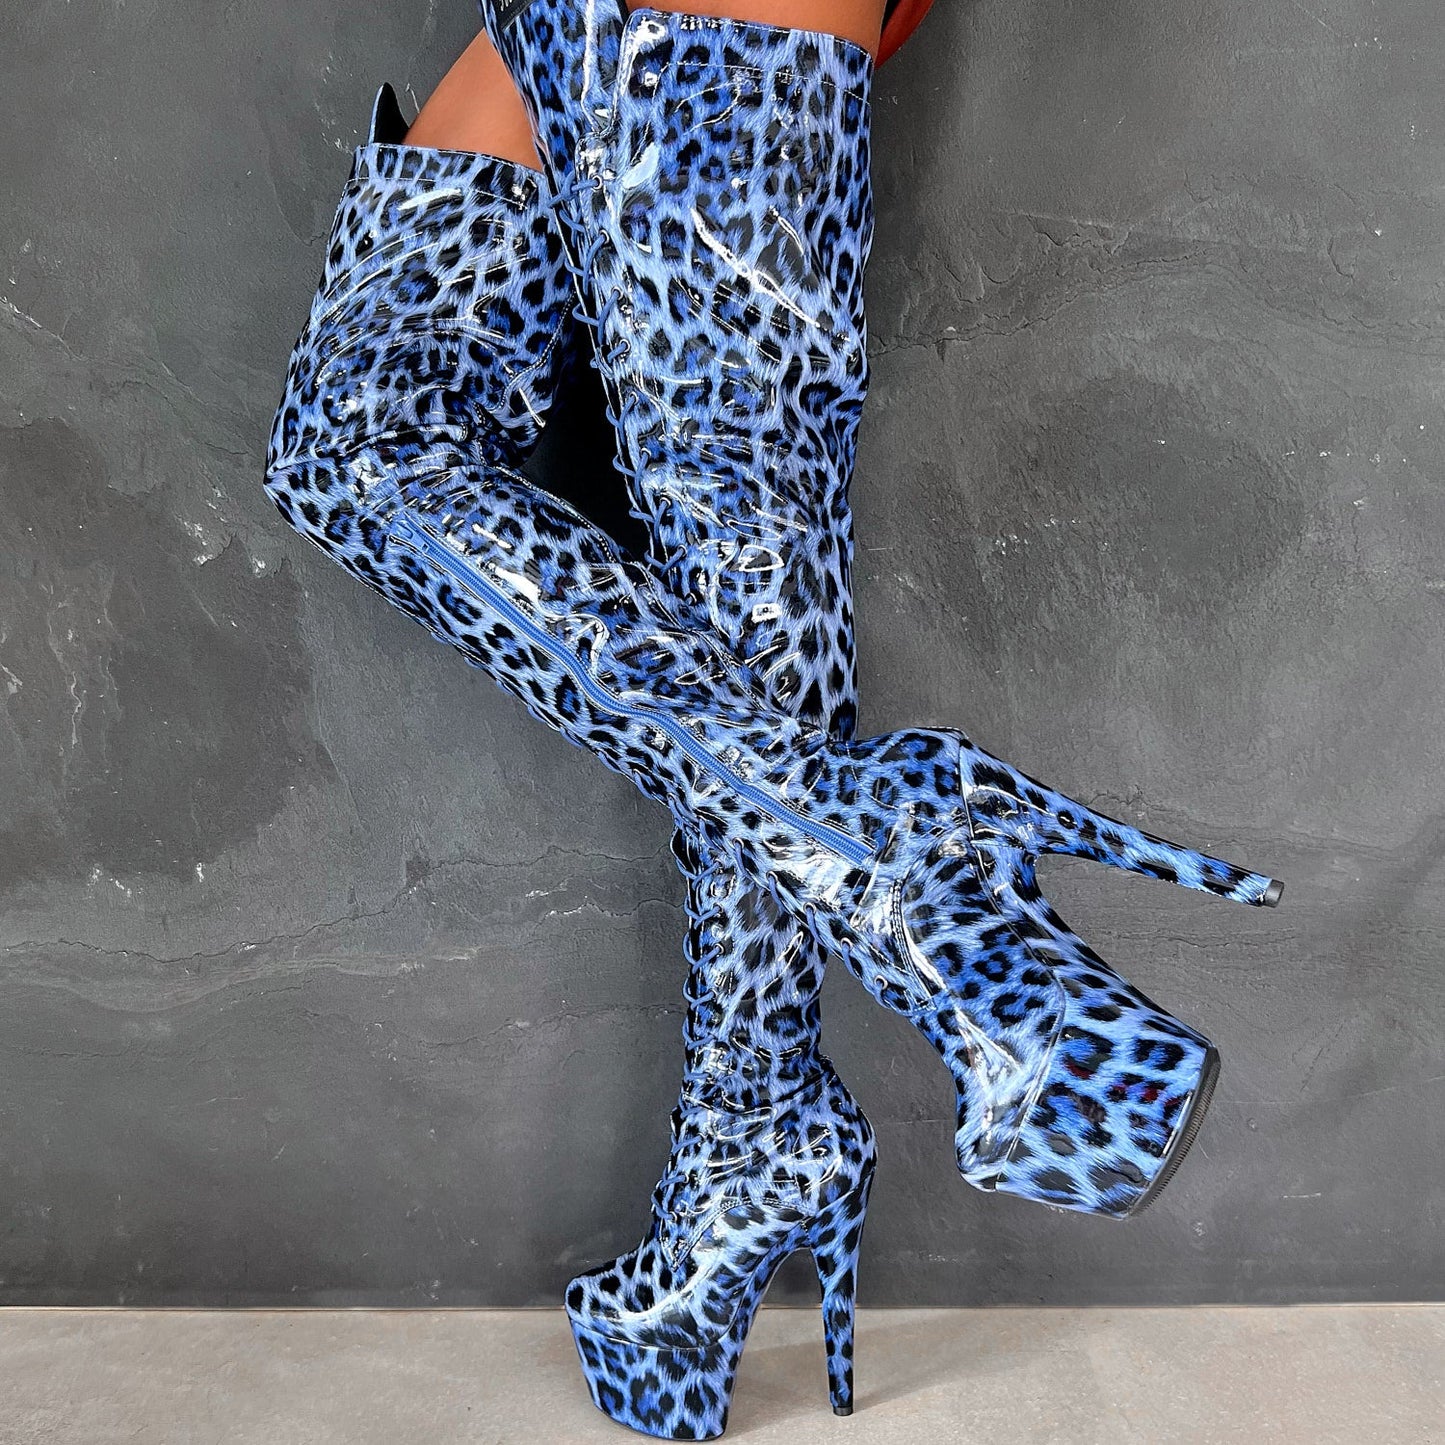 Blue Leopard Thigh High - 7 INCH + SP - Limited Edition